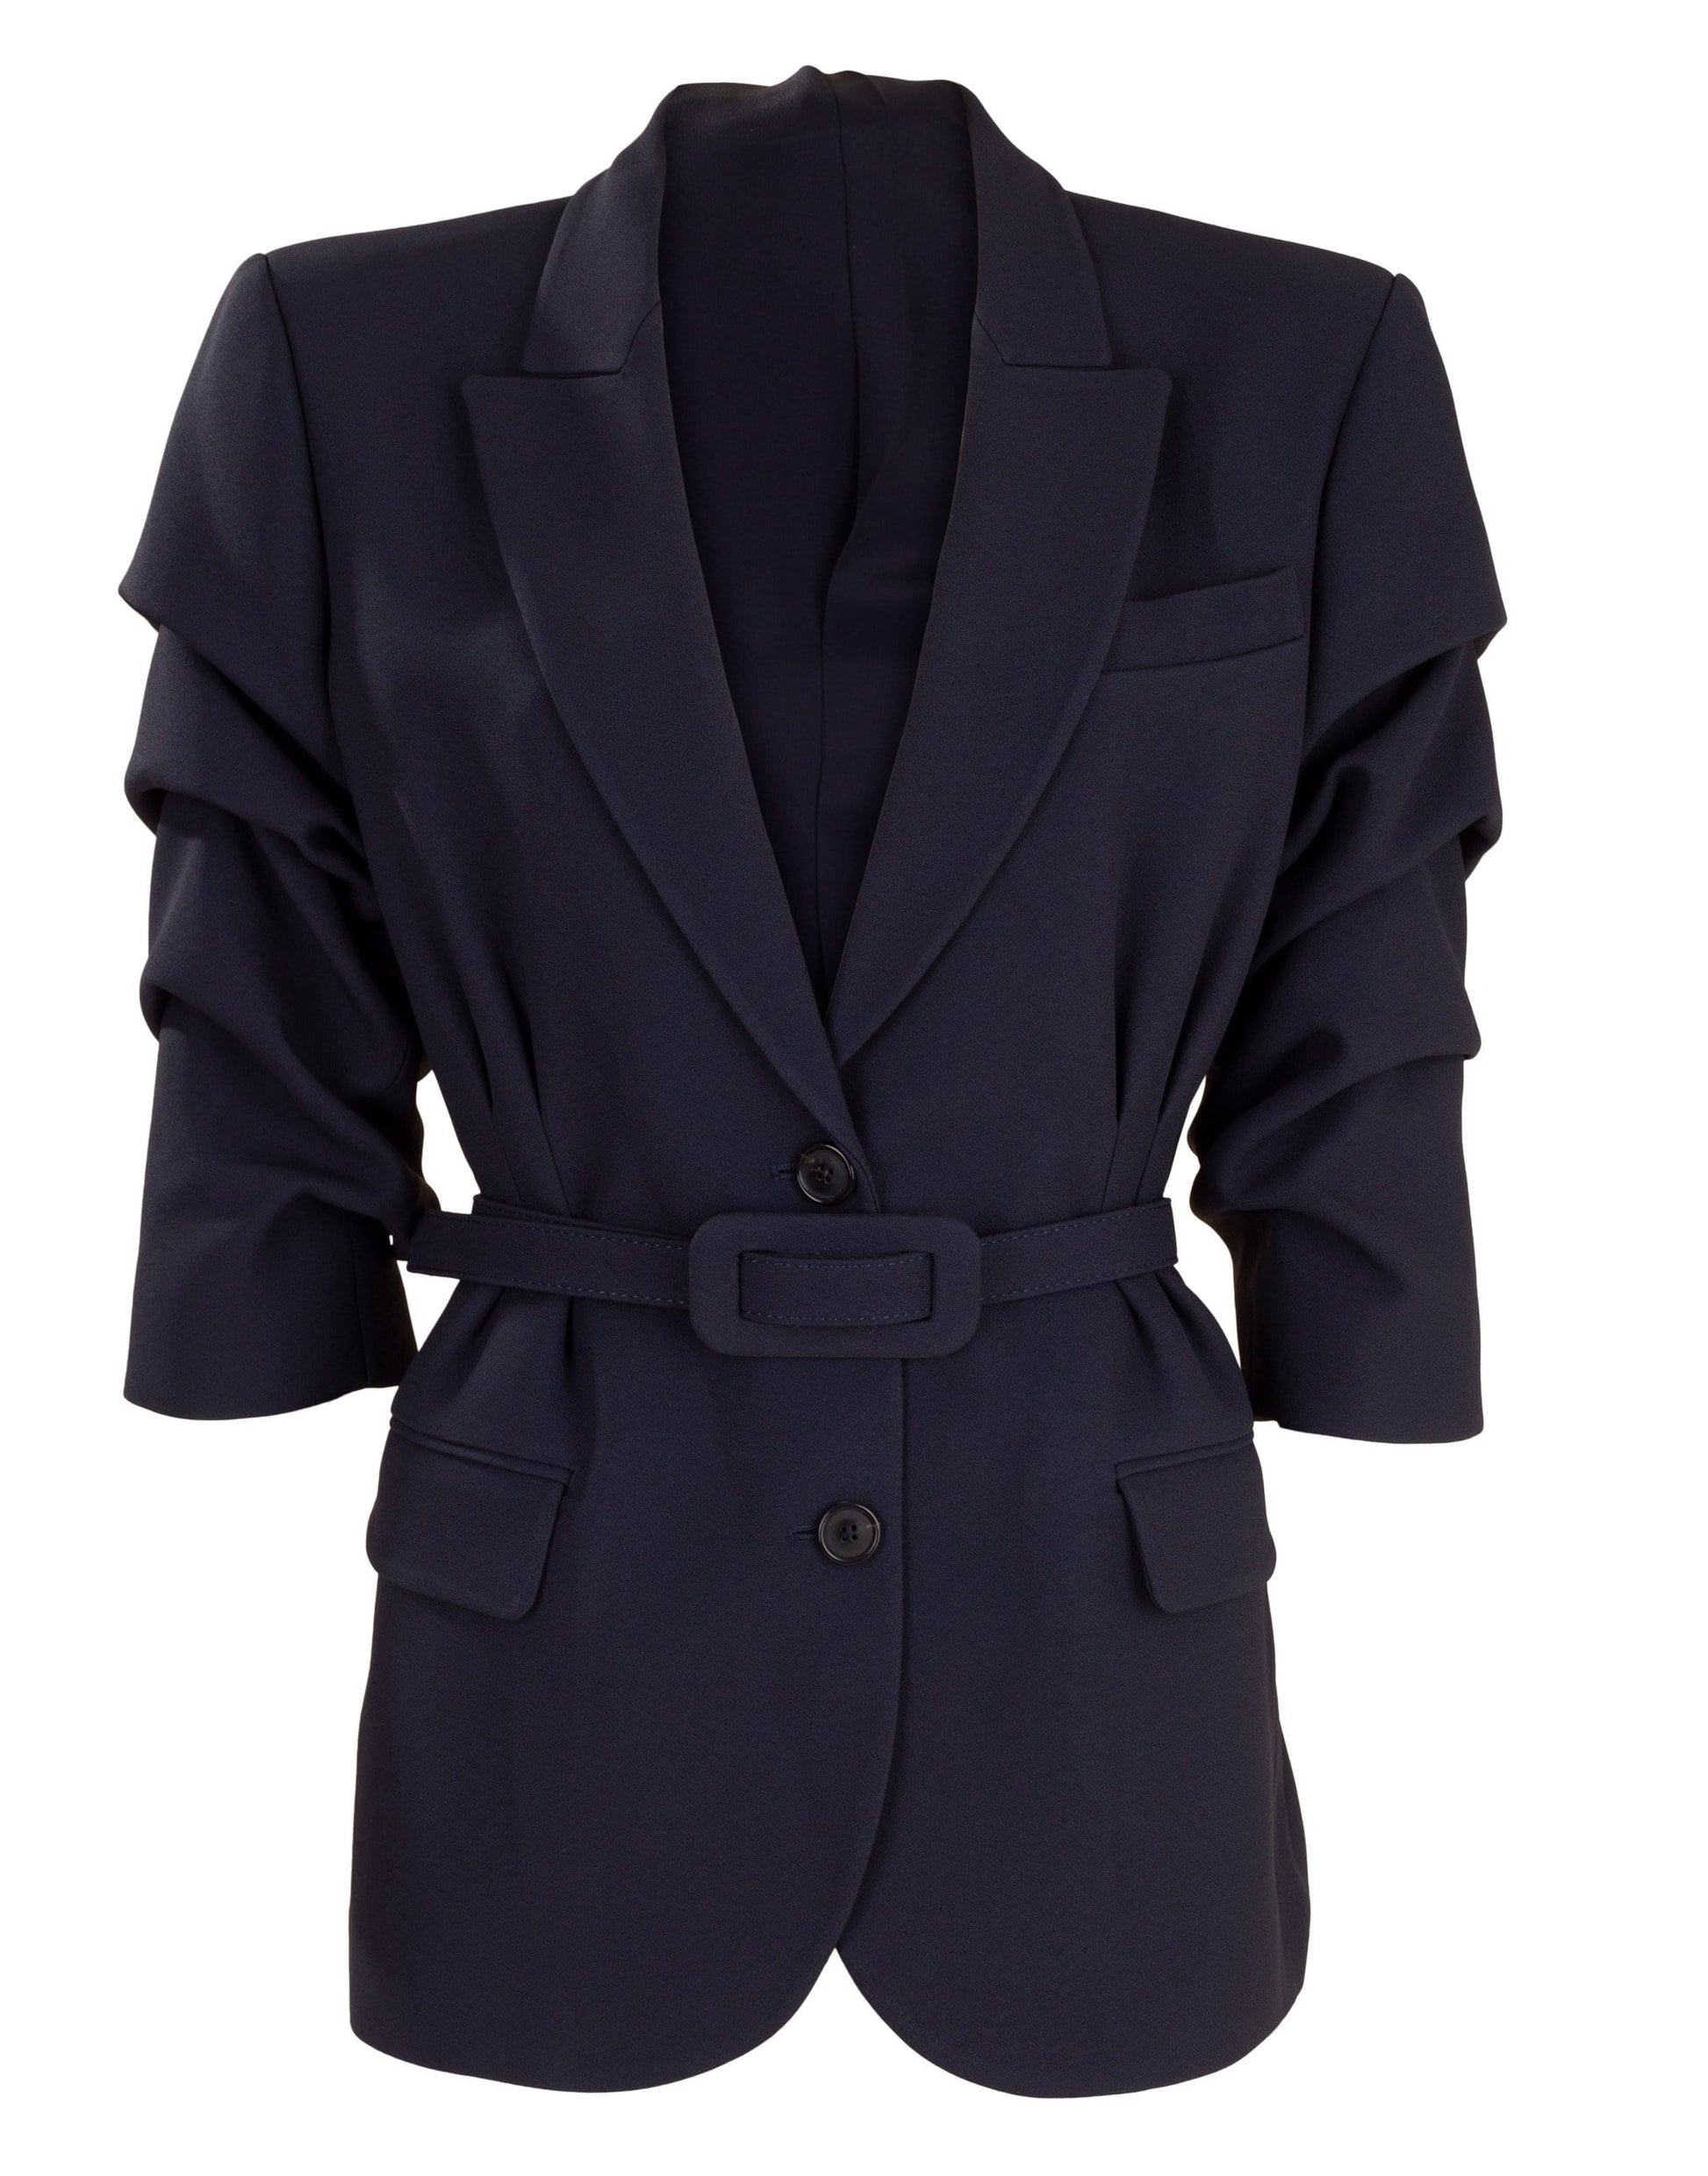 MICHAEL KORS-Midnight Crushed Sleeve Fitted Blazer-